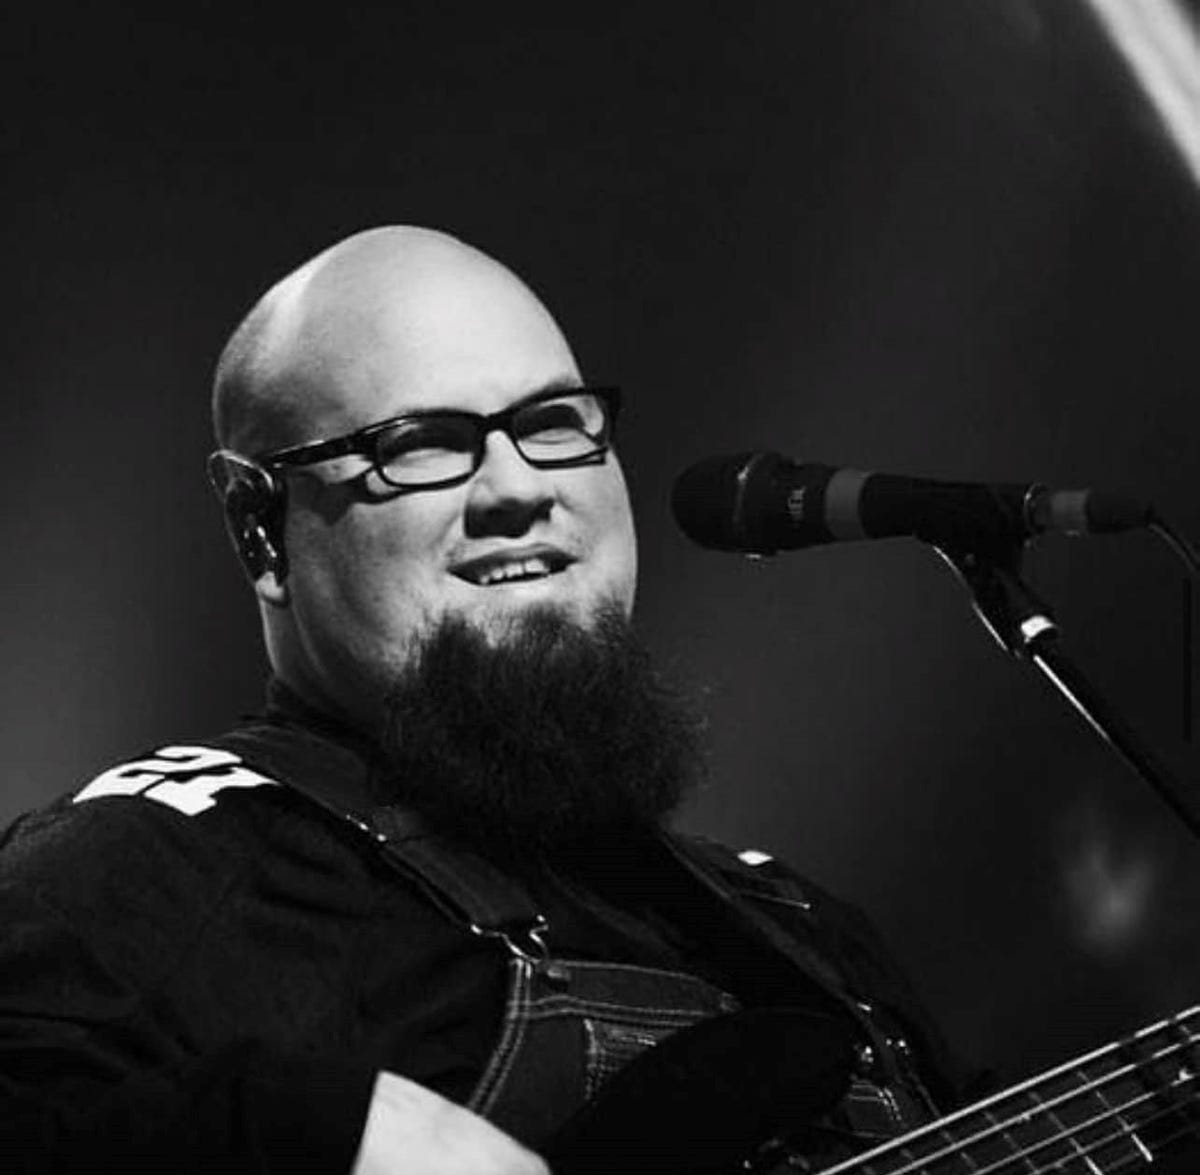 Big Daddy Weave bassist Jay Weaver dies of COVID-19 complications